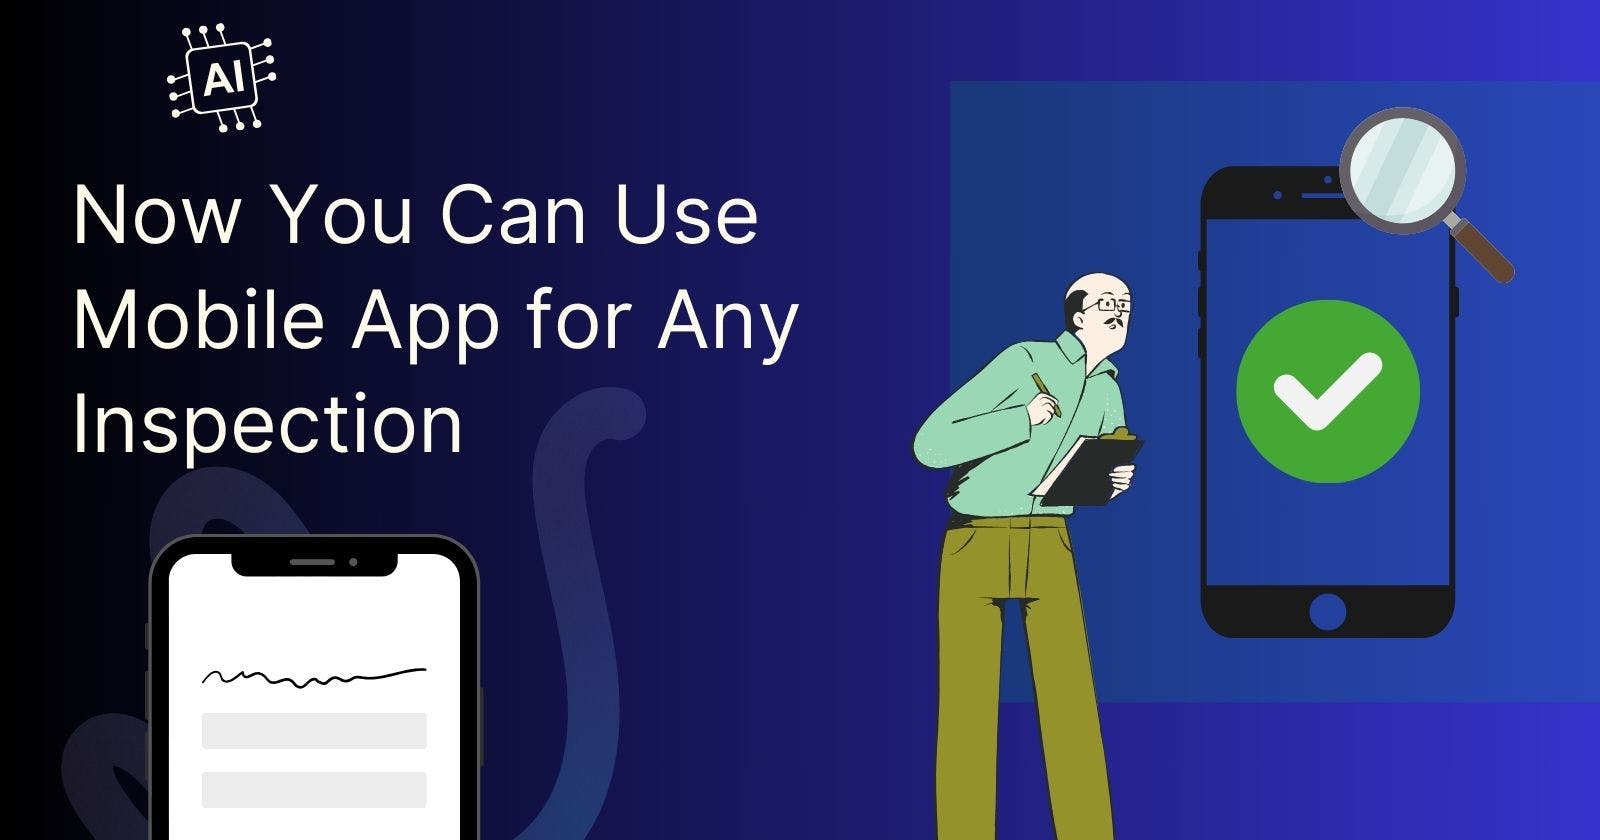 Have You Ever Considered a Mobile App for Your Inspections?